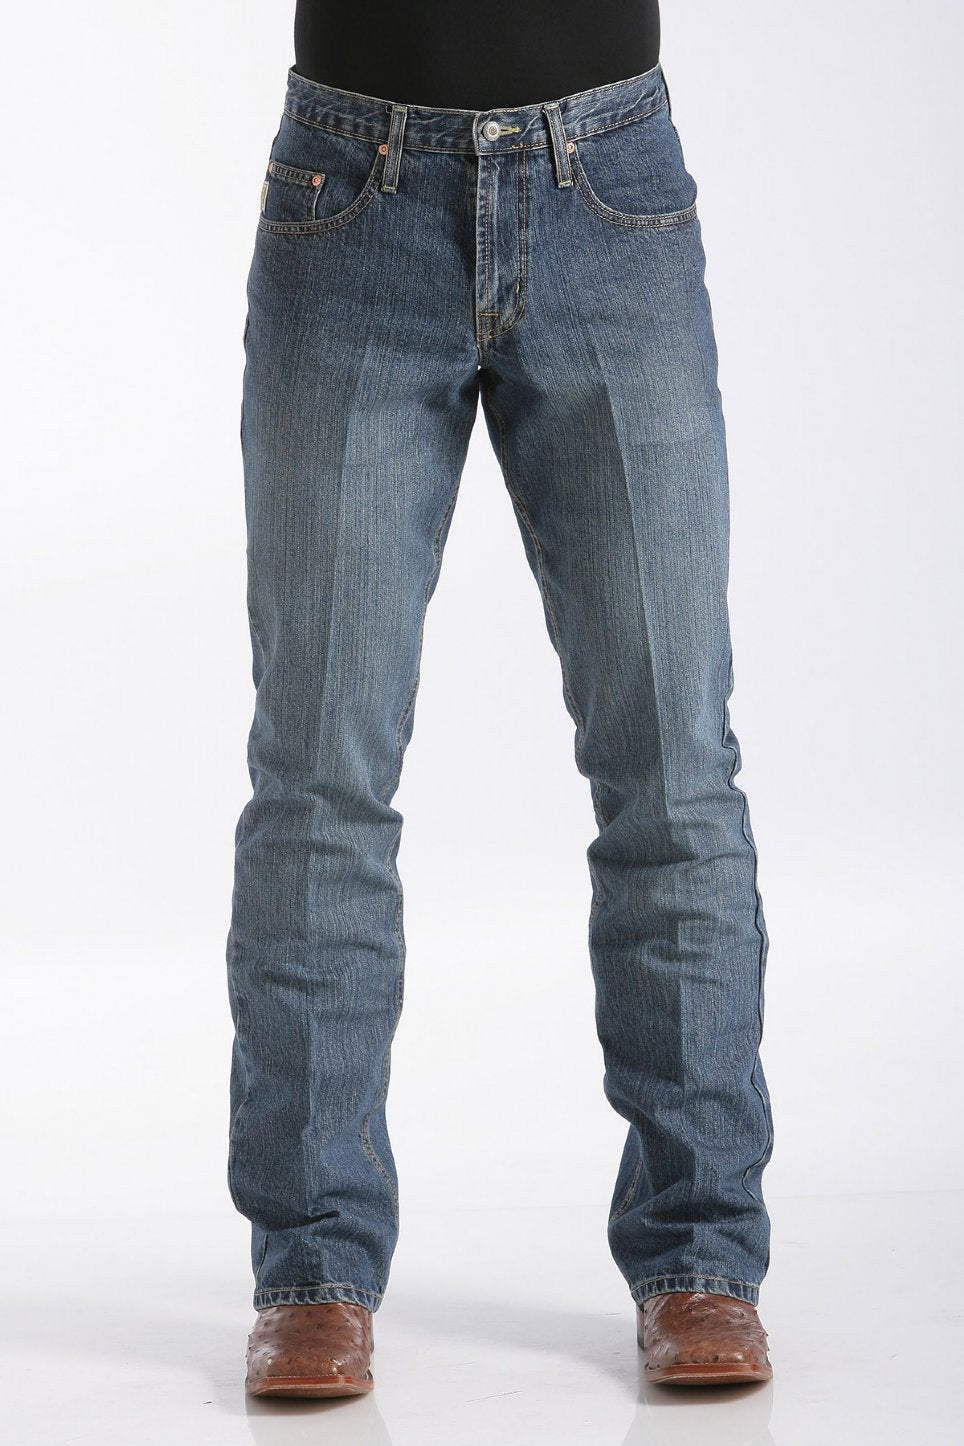 CINCH RELAXED FIT DOOLEY JEAN